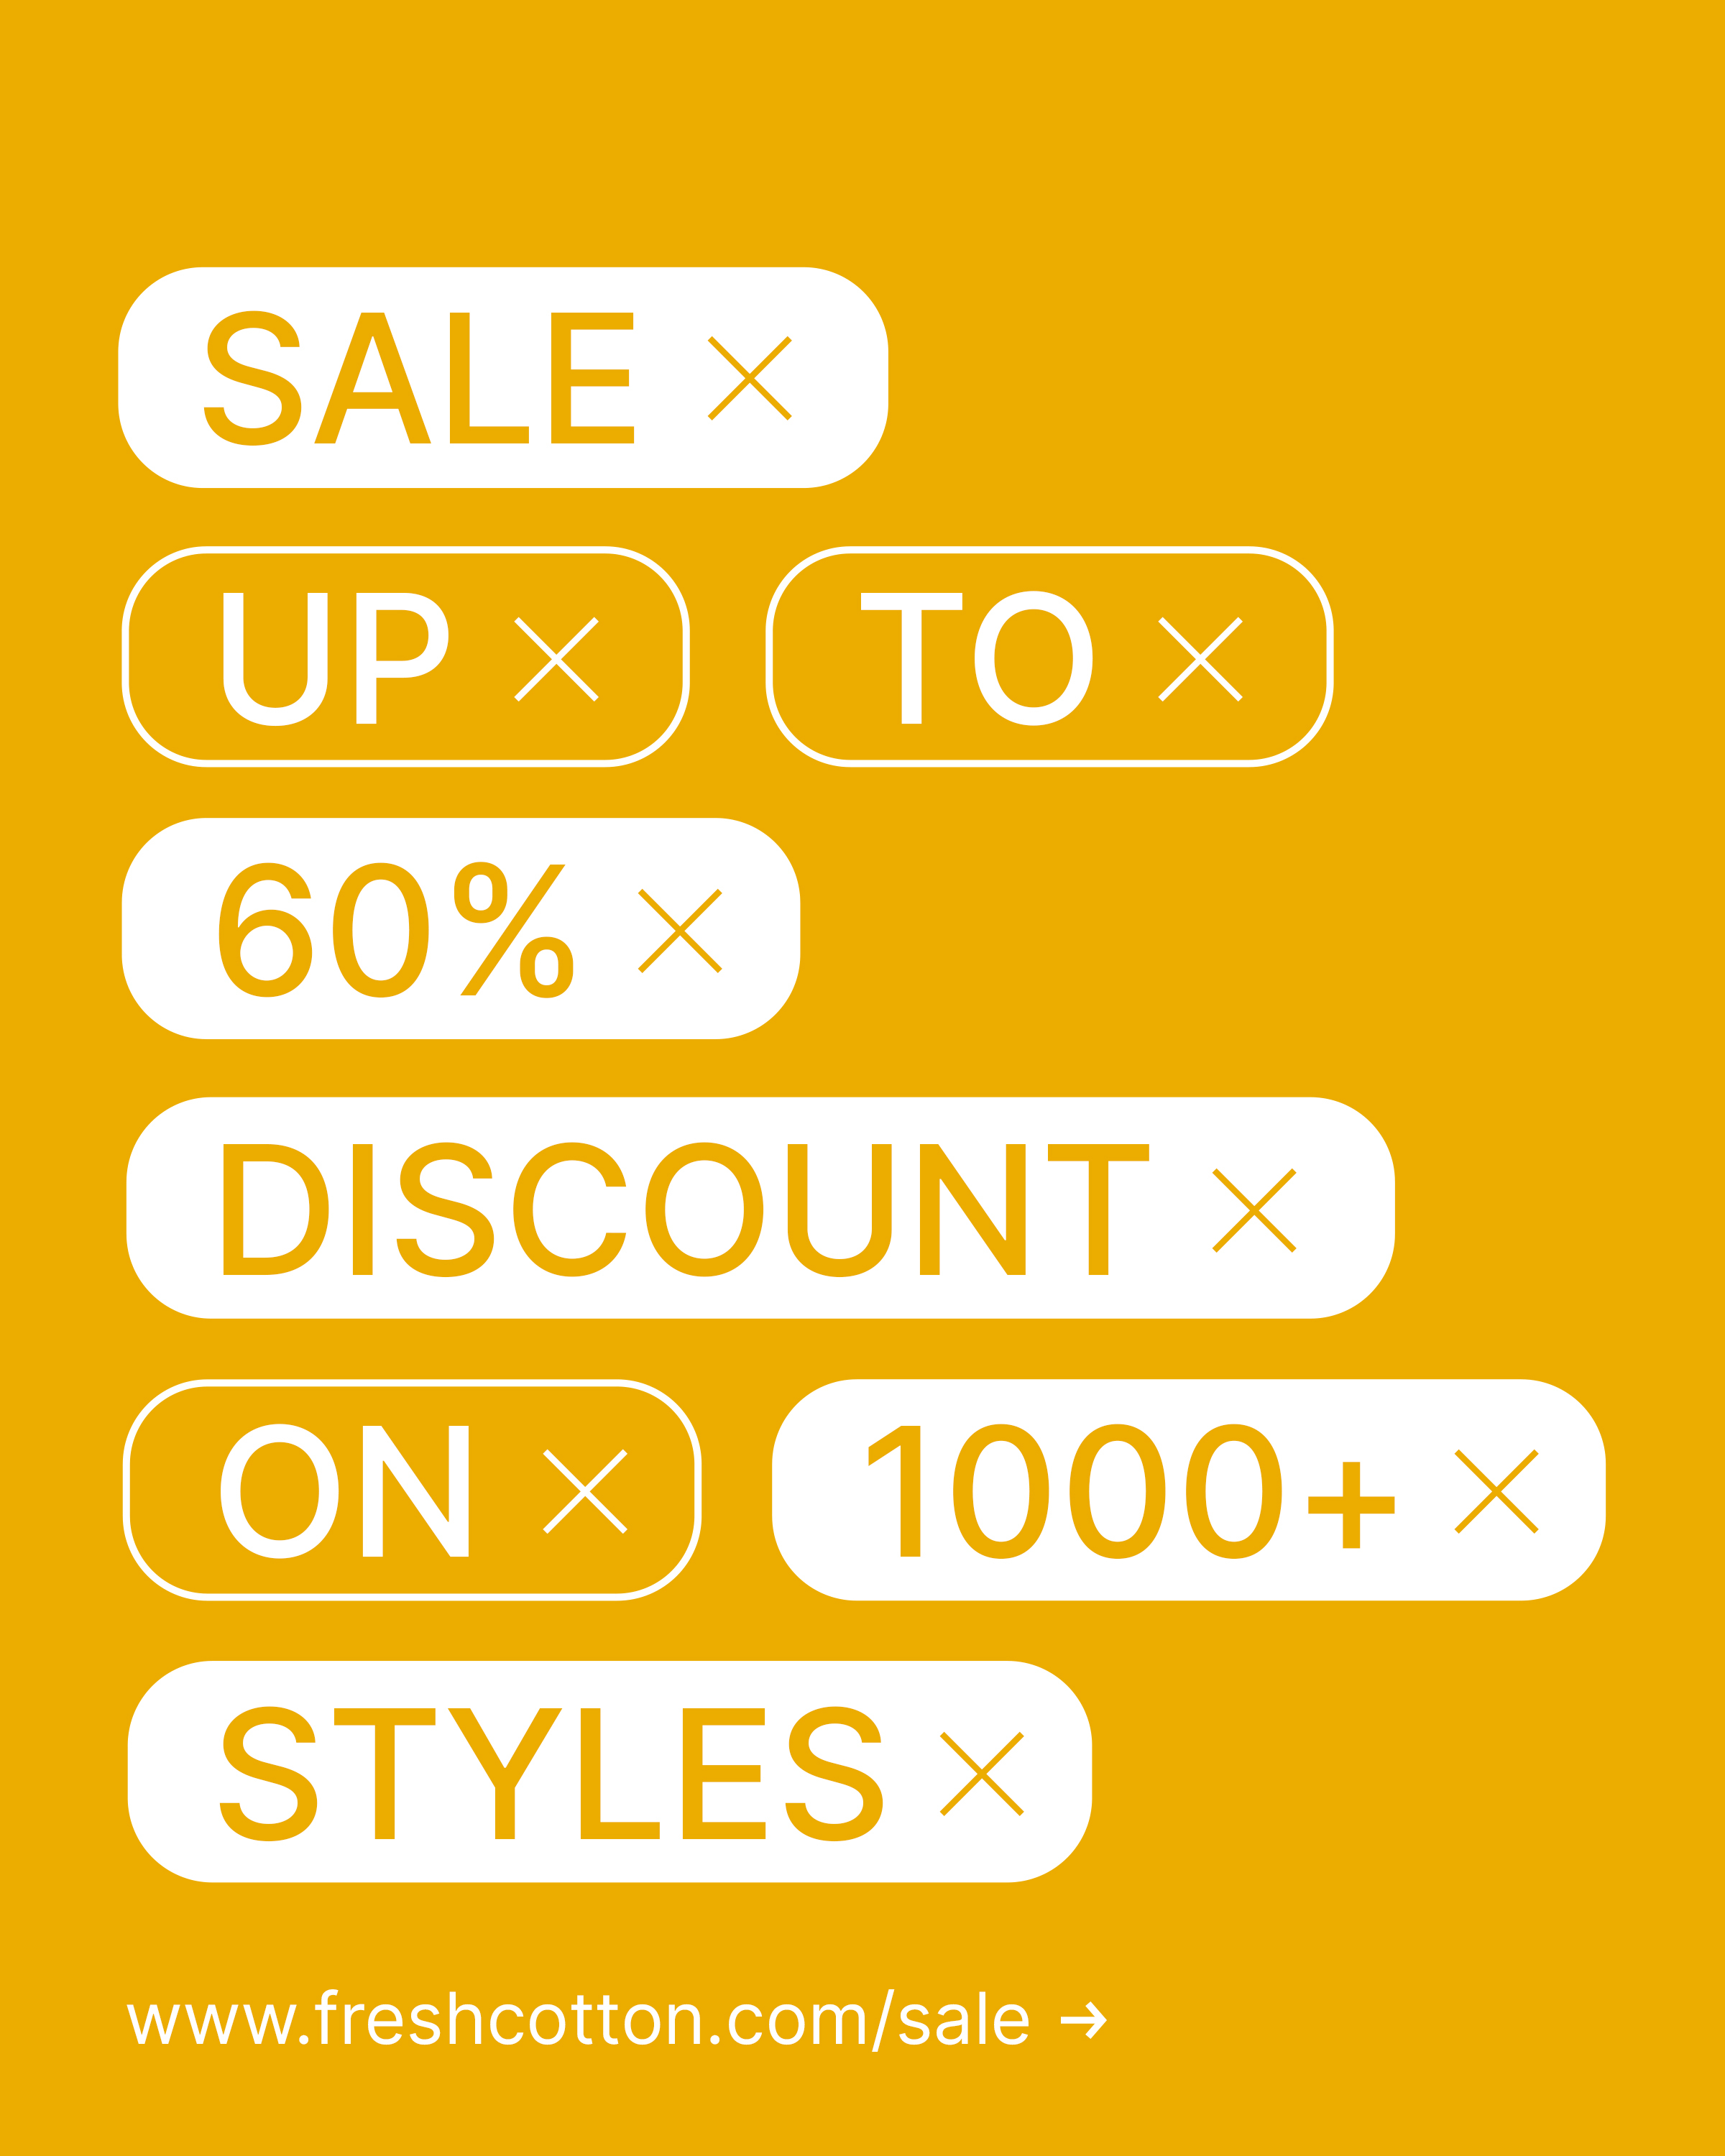 Sale: up to 60% discount on 1000+ items